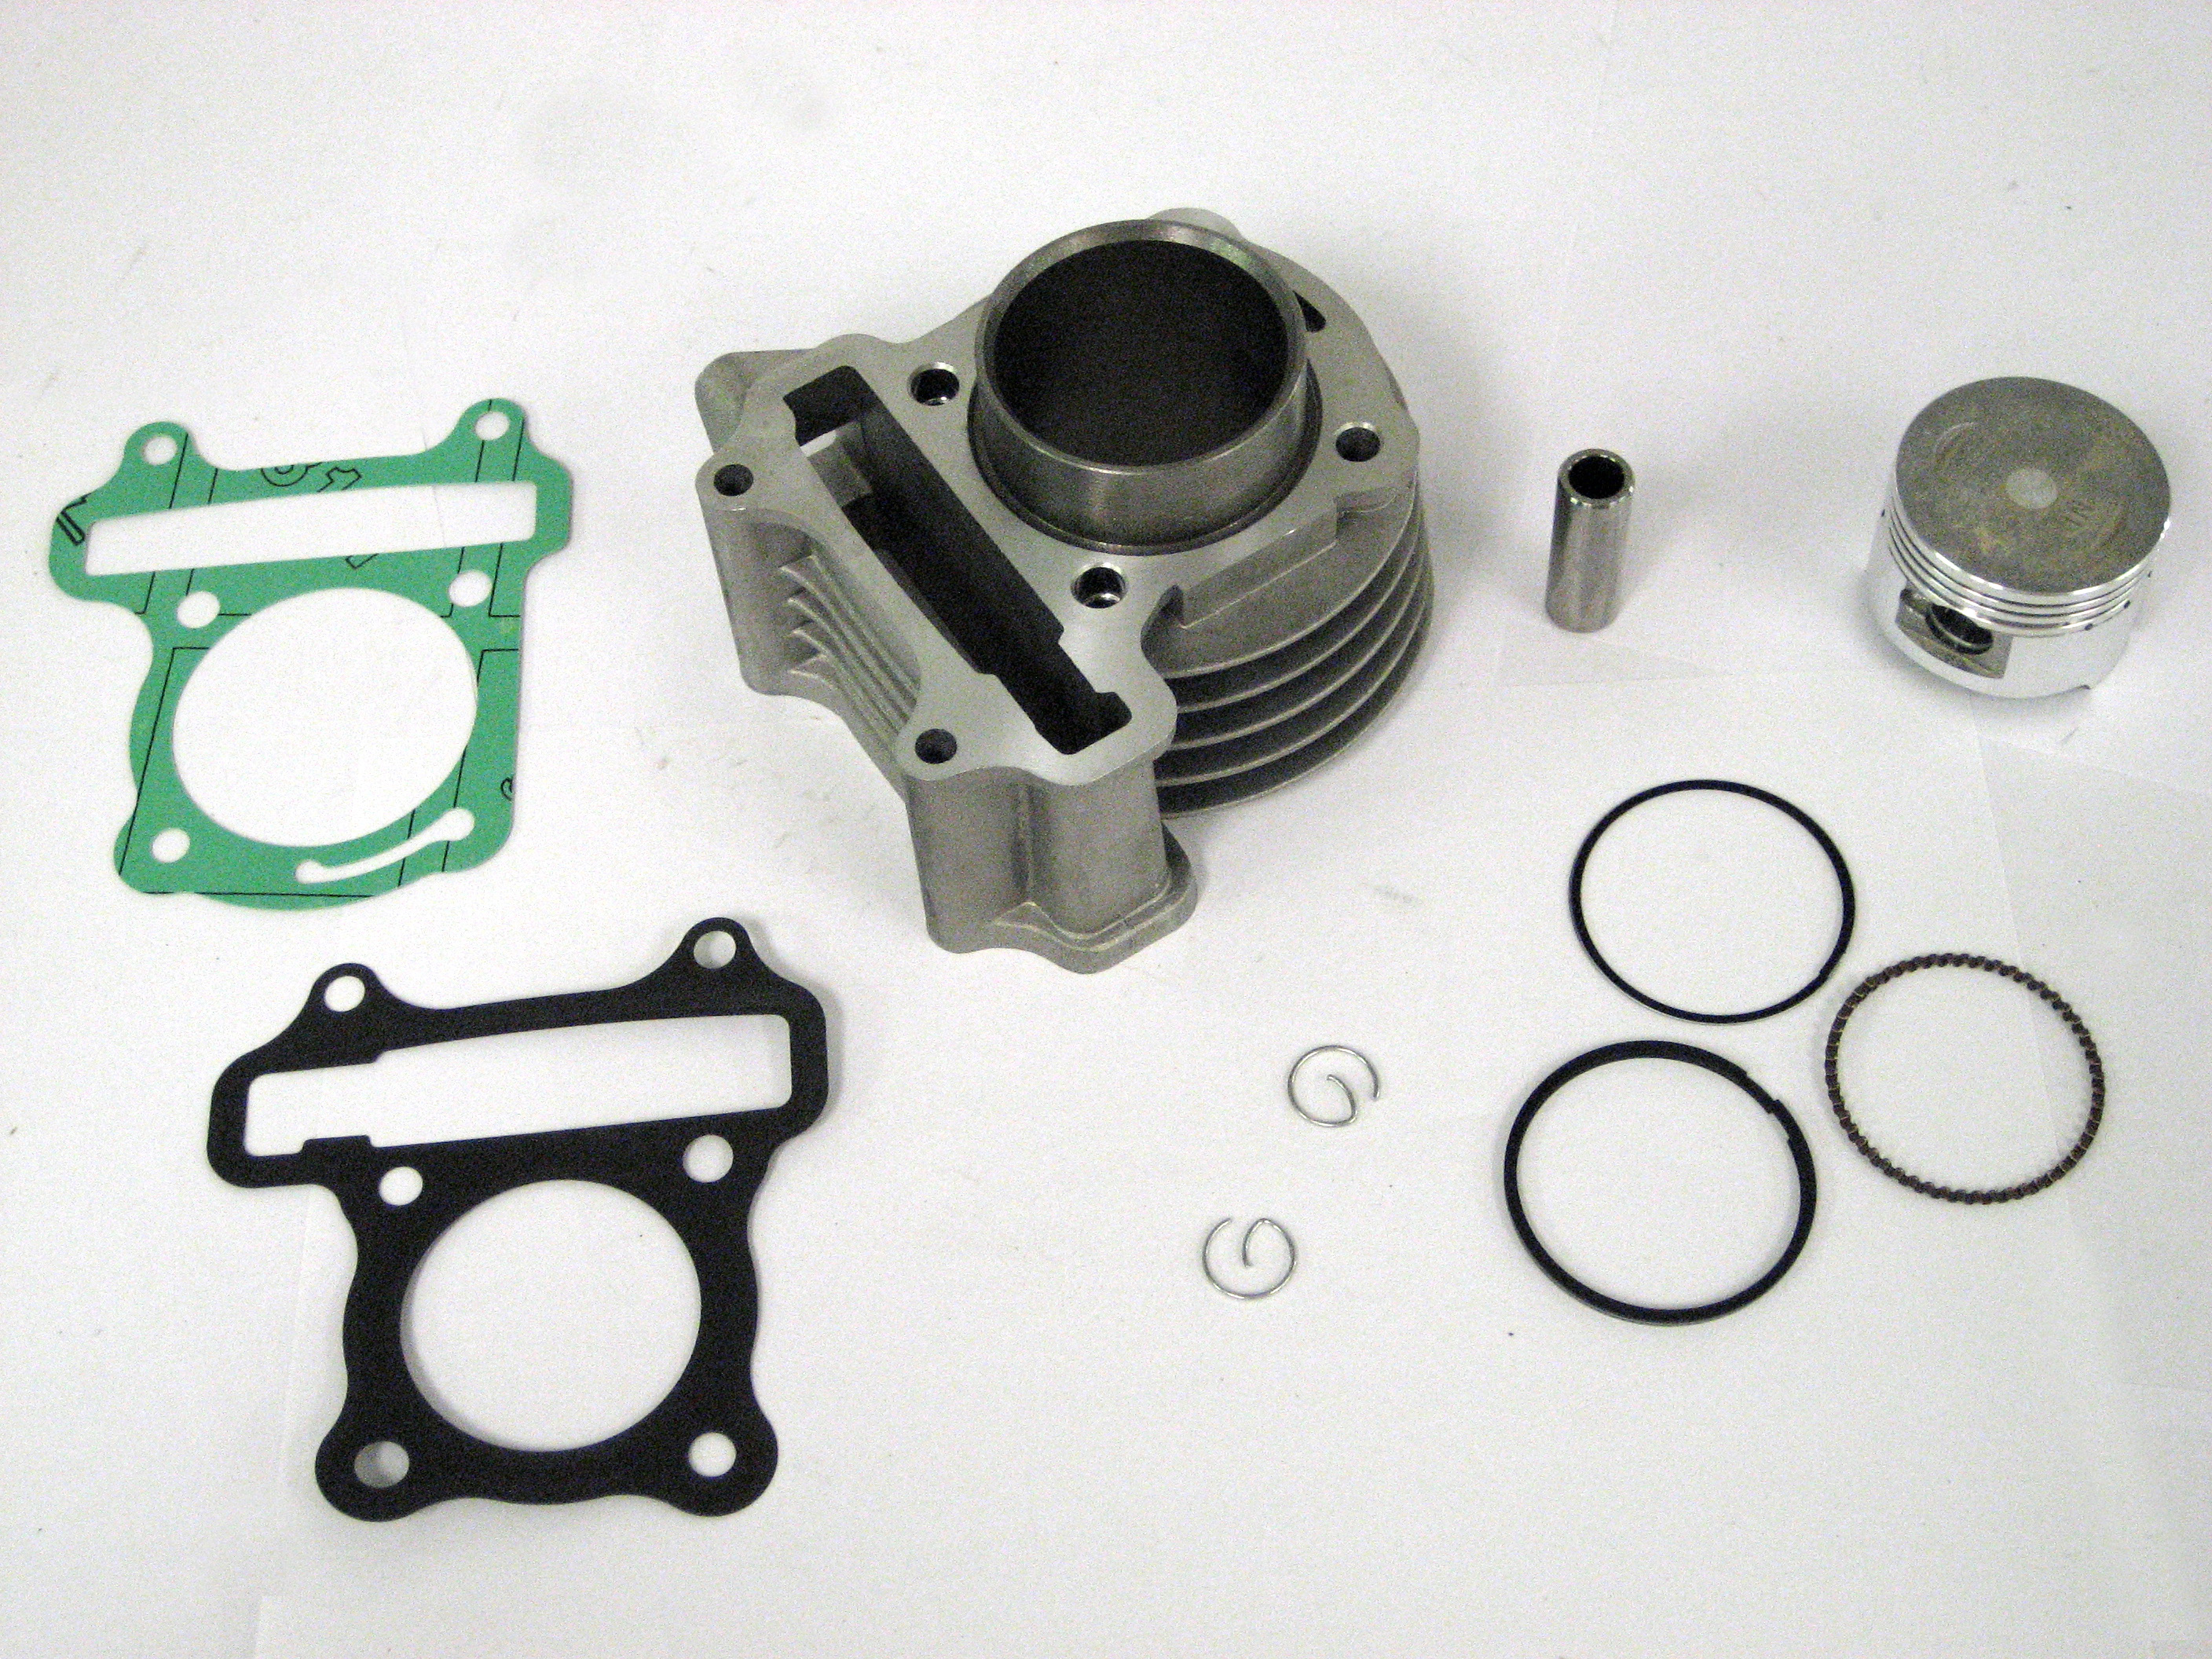 80cc (High Performance) Cylinder Piston Top End Kit For GY6-50 QMB139 Chinese Scooter Motors. Bore=47mm Requires Head #634585